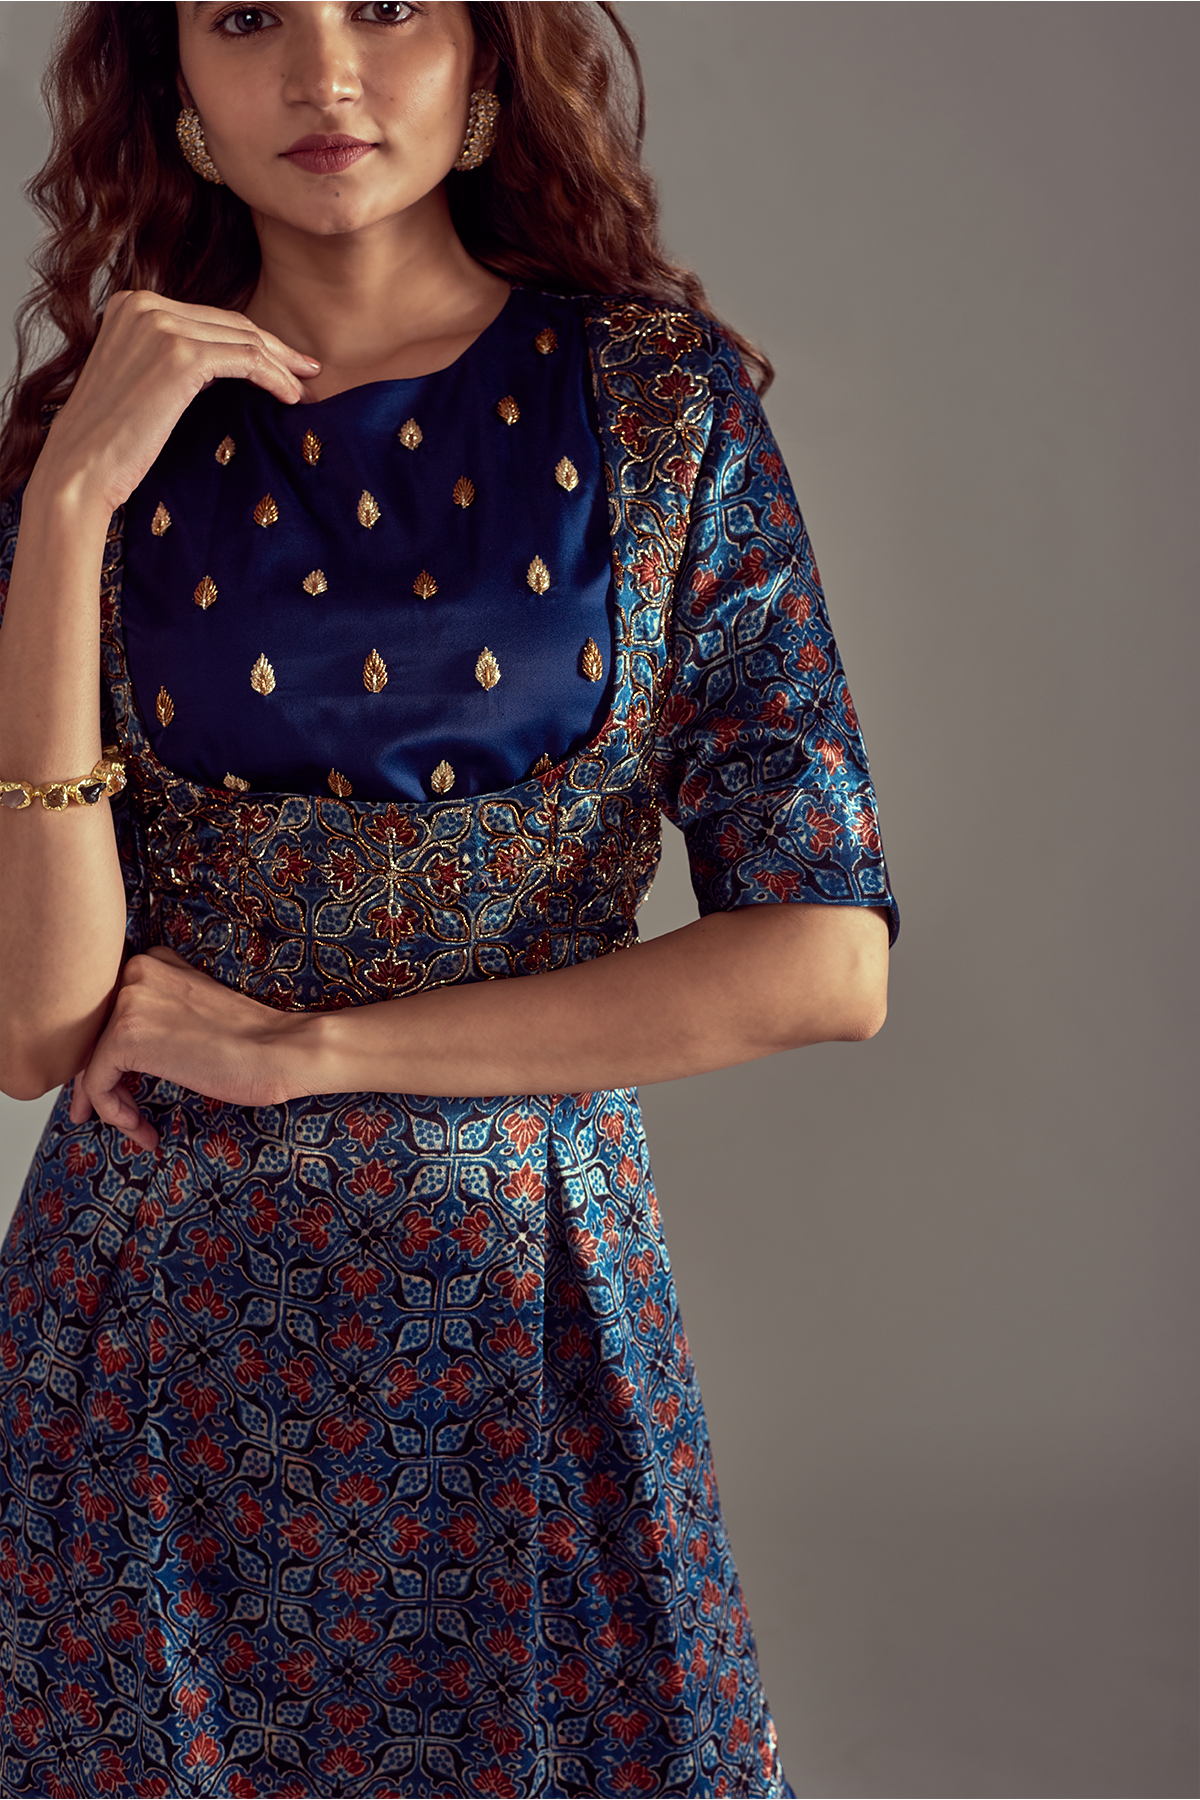 "Charming Cobalt Blue Short Kurti in Mashru Silk Ajrakh Print, adorned with Nakshi Embroidery, perfectly paired with Pleated Dhoti for a graceful look."